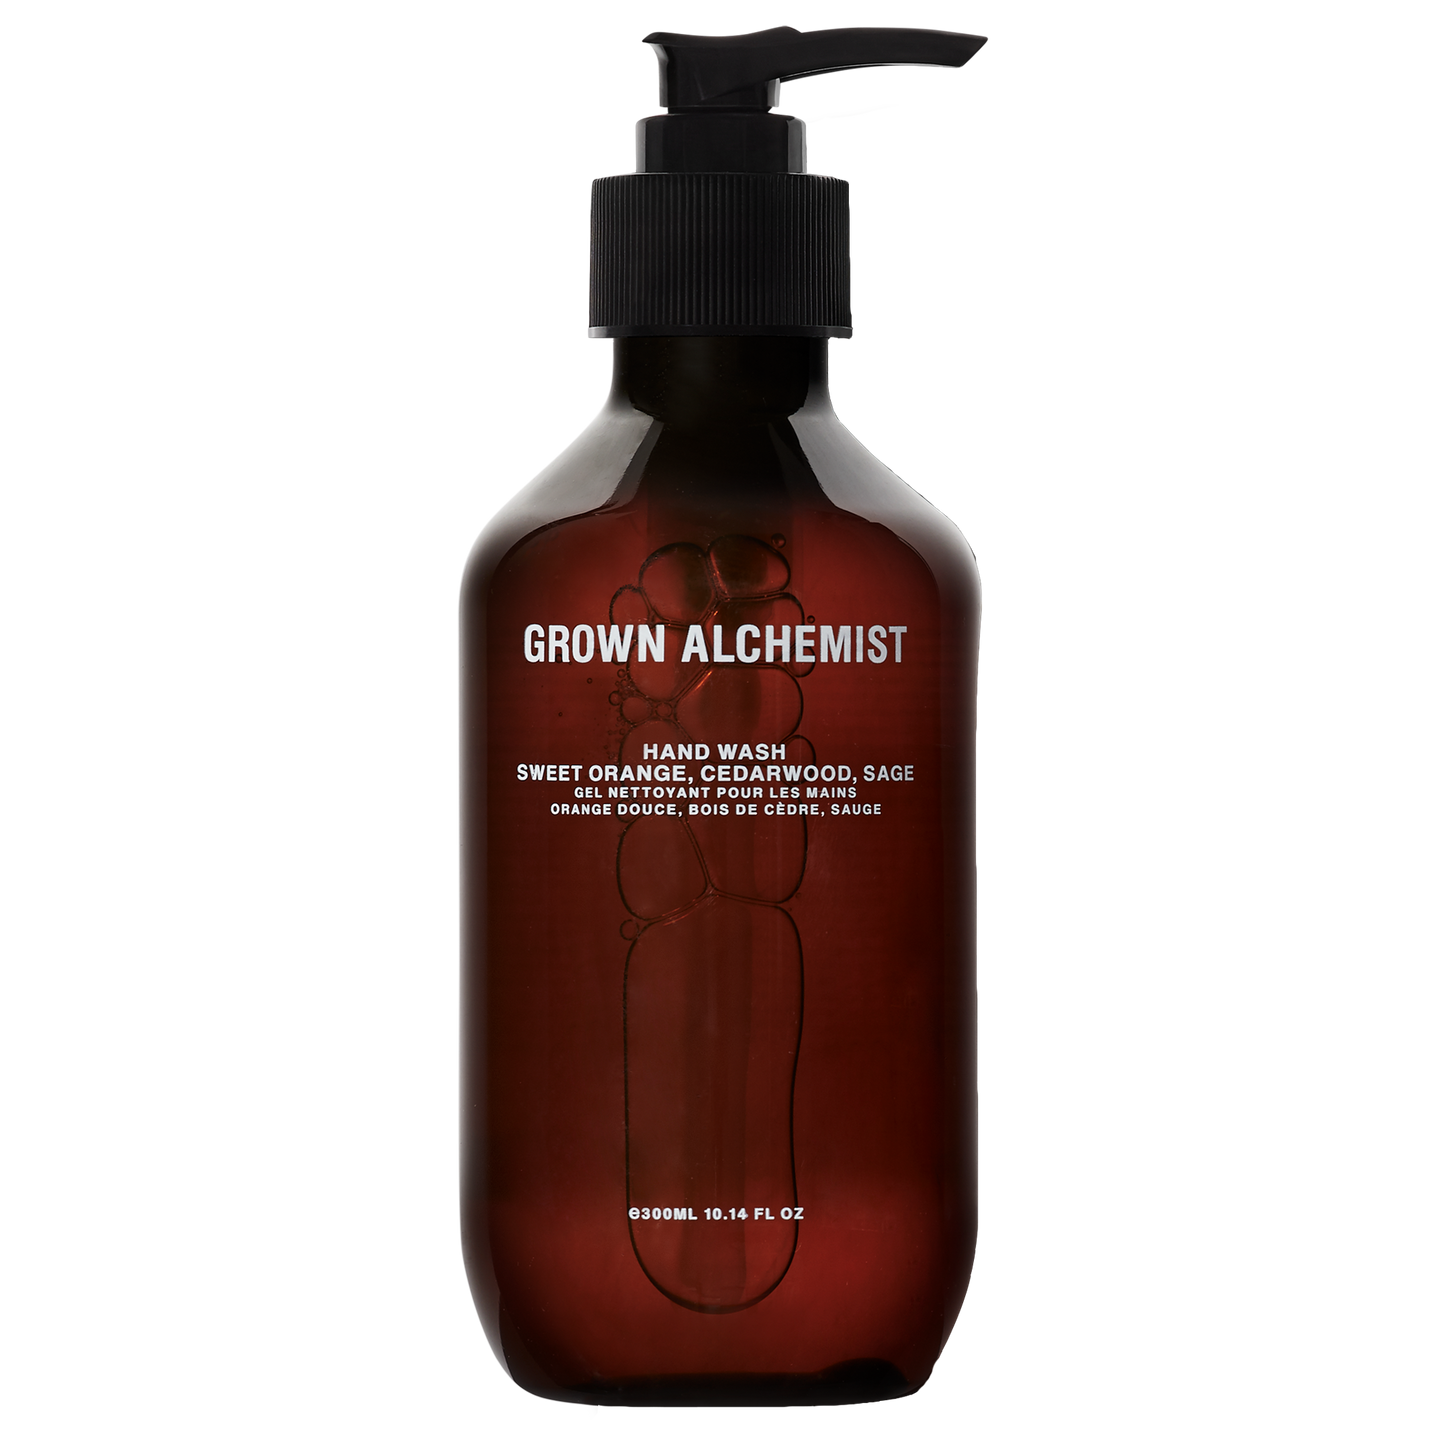 Grown Alchemist Hand Wash: A gentle gel hand wash with skin softening and nourishing ingredients that leave skin thoroughly cleansed, refreshed and soothed.